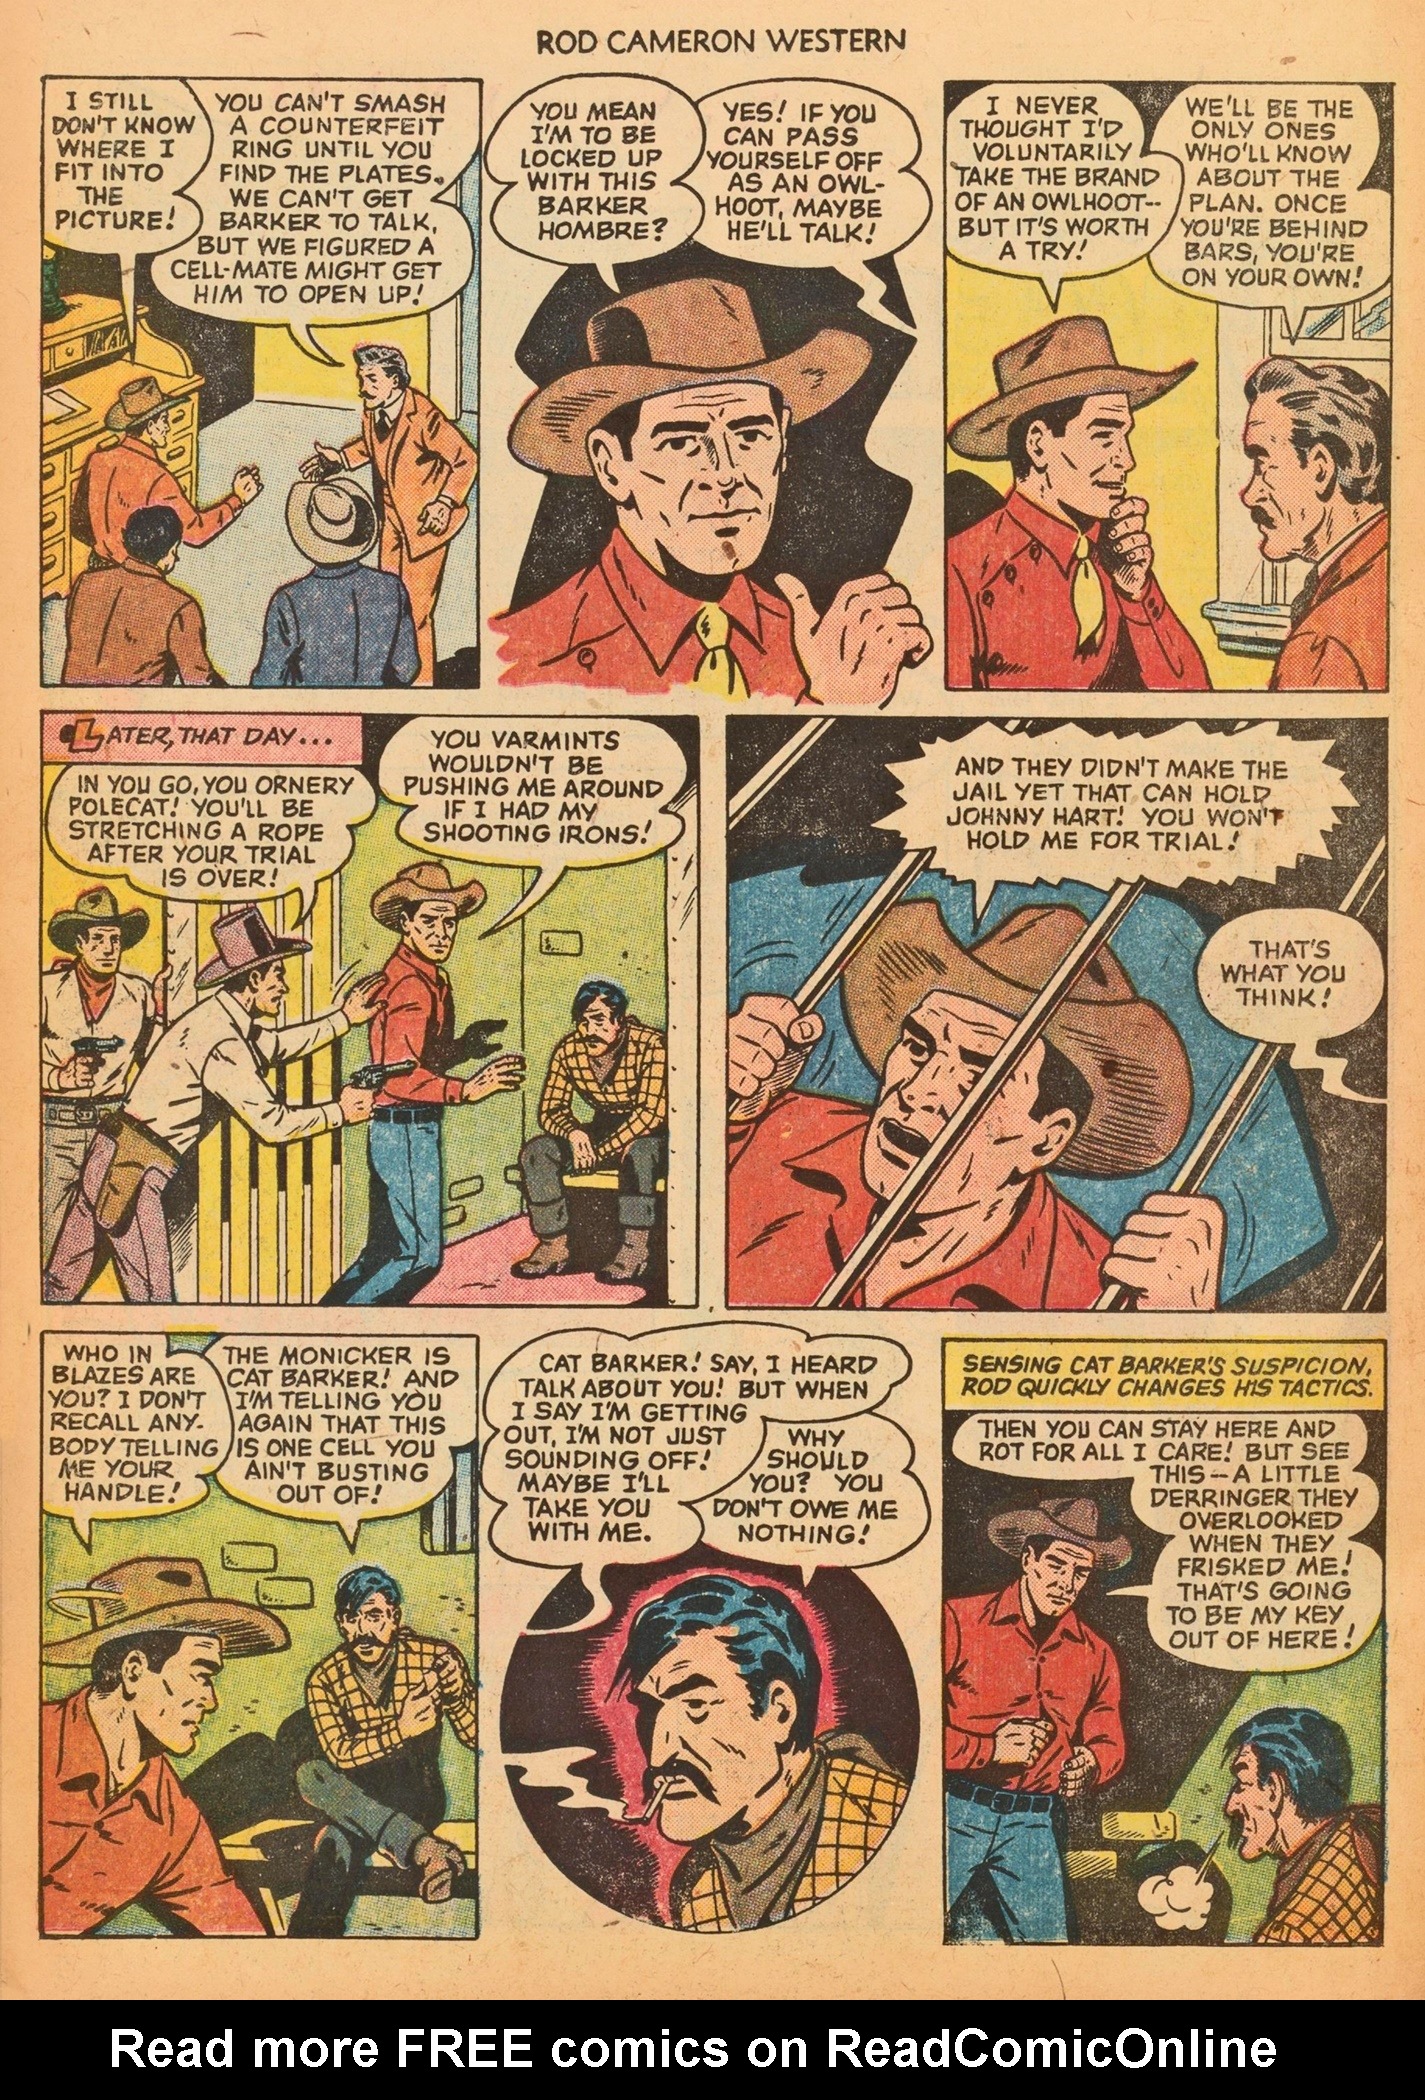 Read online Rod Cameron Western comic -  Issue #15 - 26